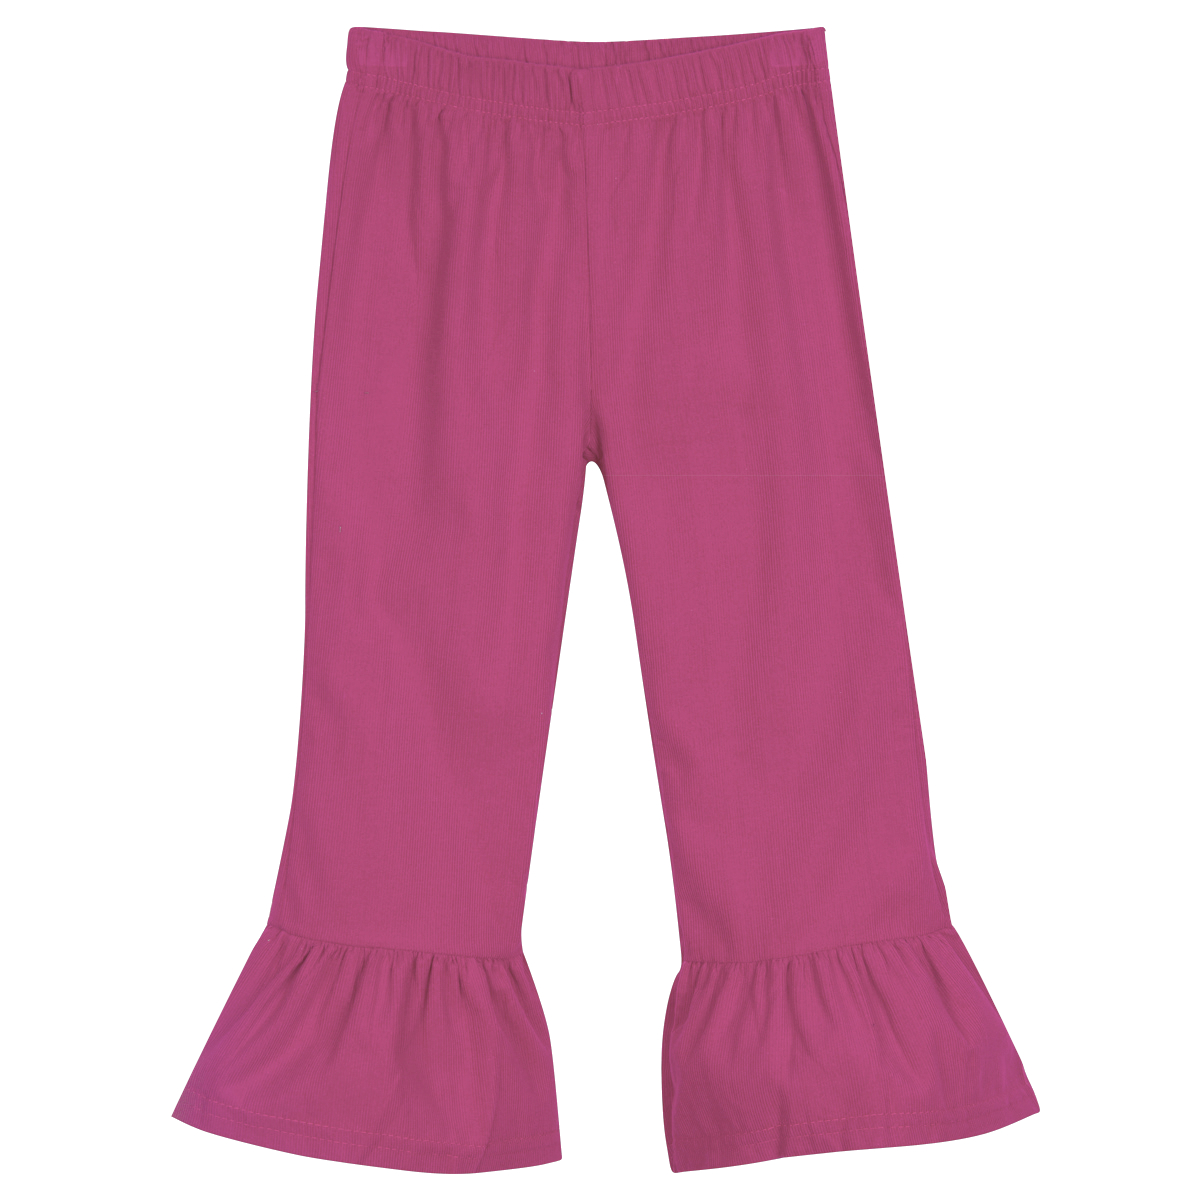 Girl's Striped Boutique Ruffle Pants